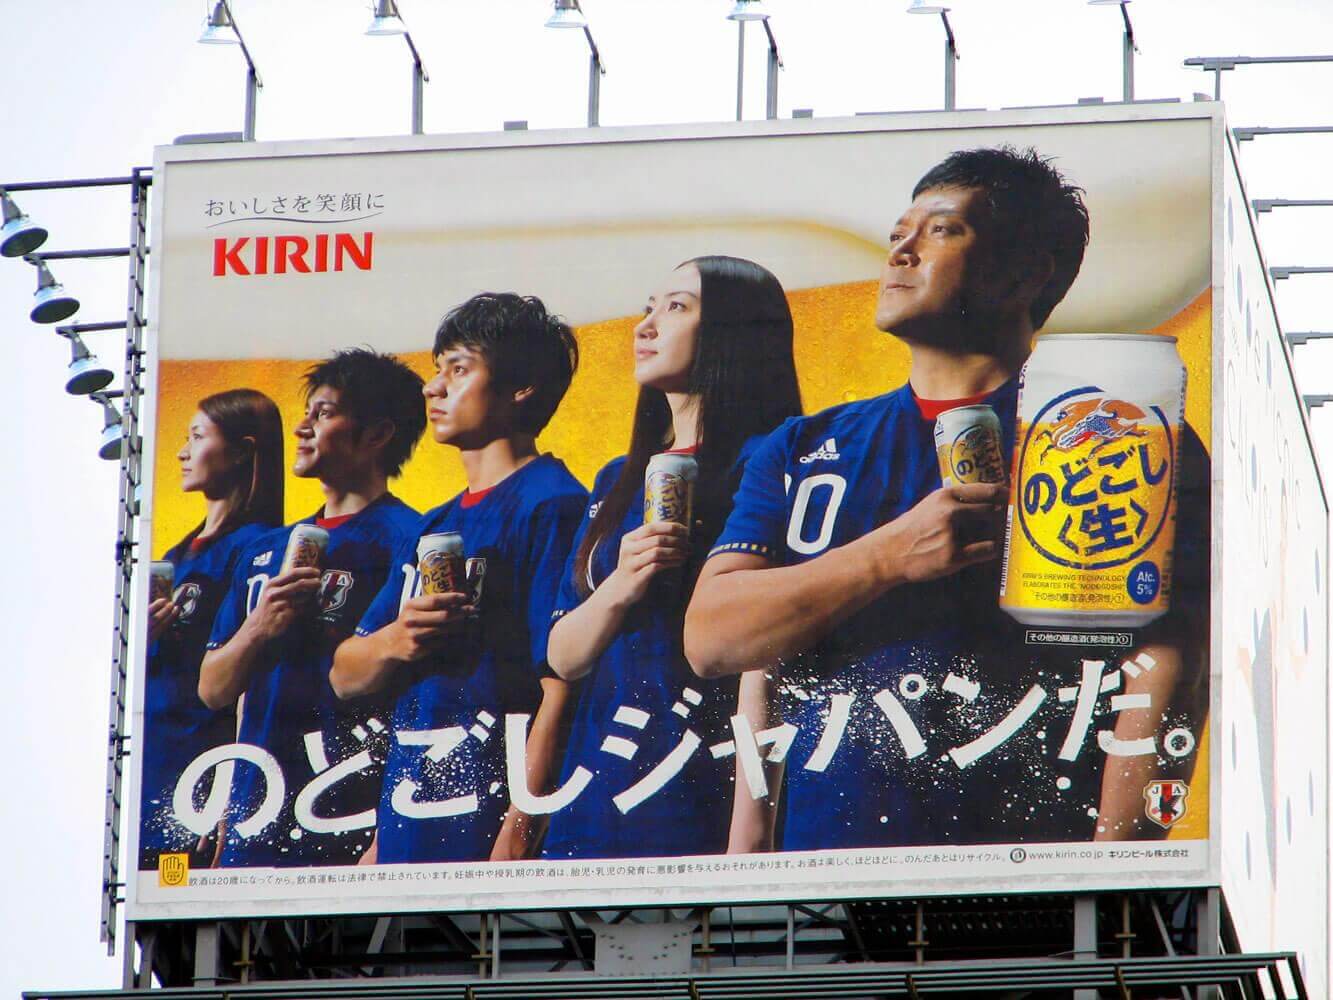 A beer ad mixed with sports pride brings familiarity to the table